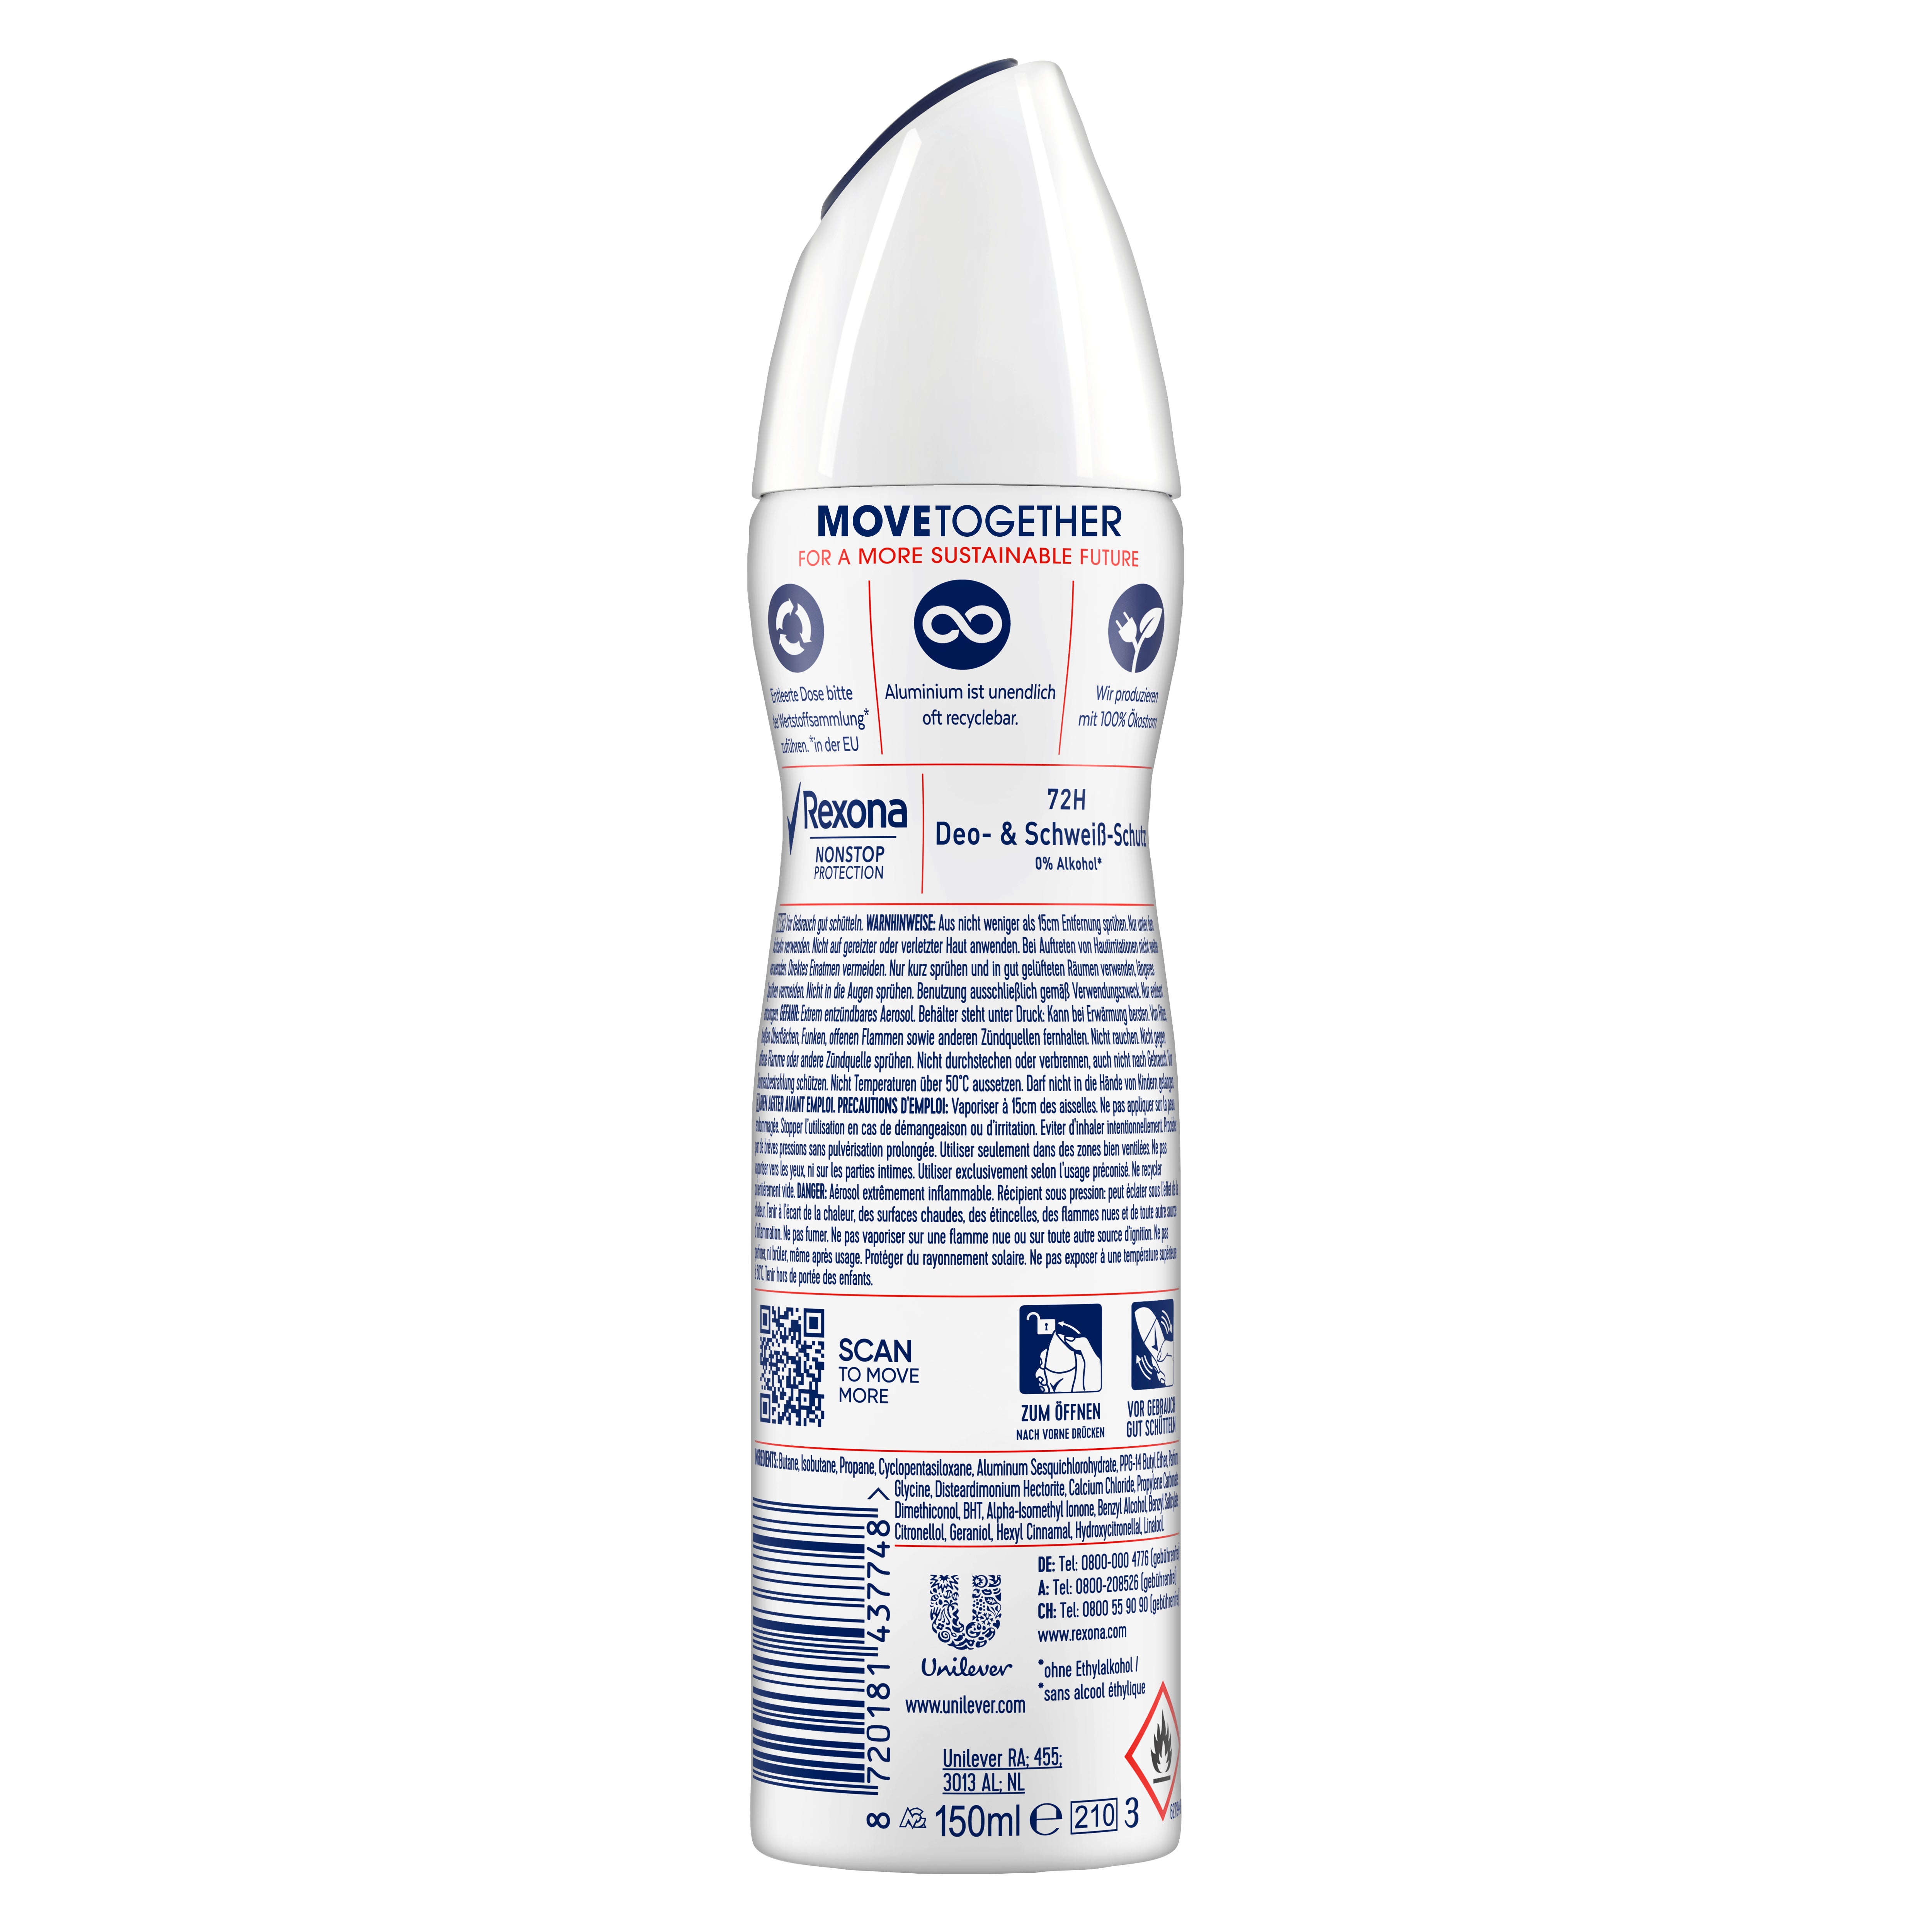 Rexona  Deospray  Nonstop Protection Summer Moves Limited Edition  150 ML